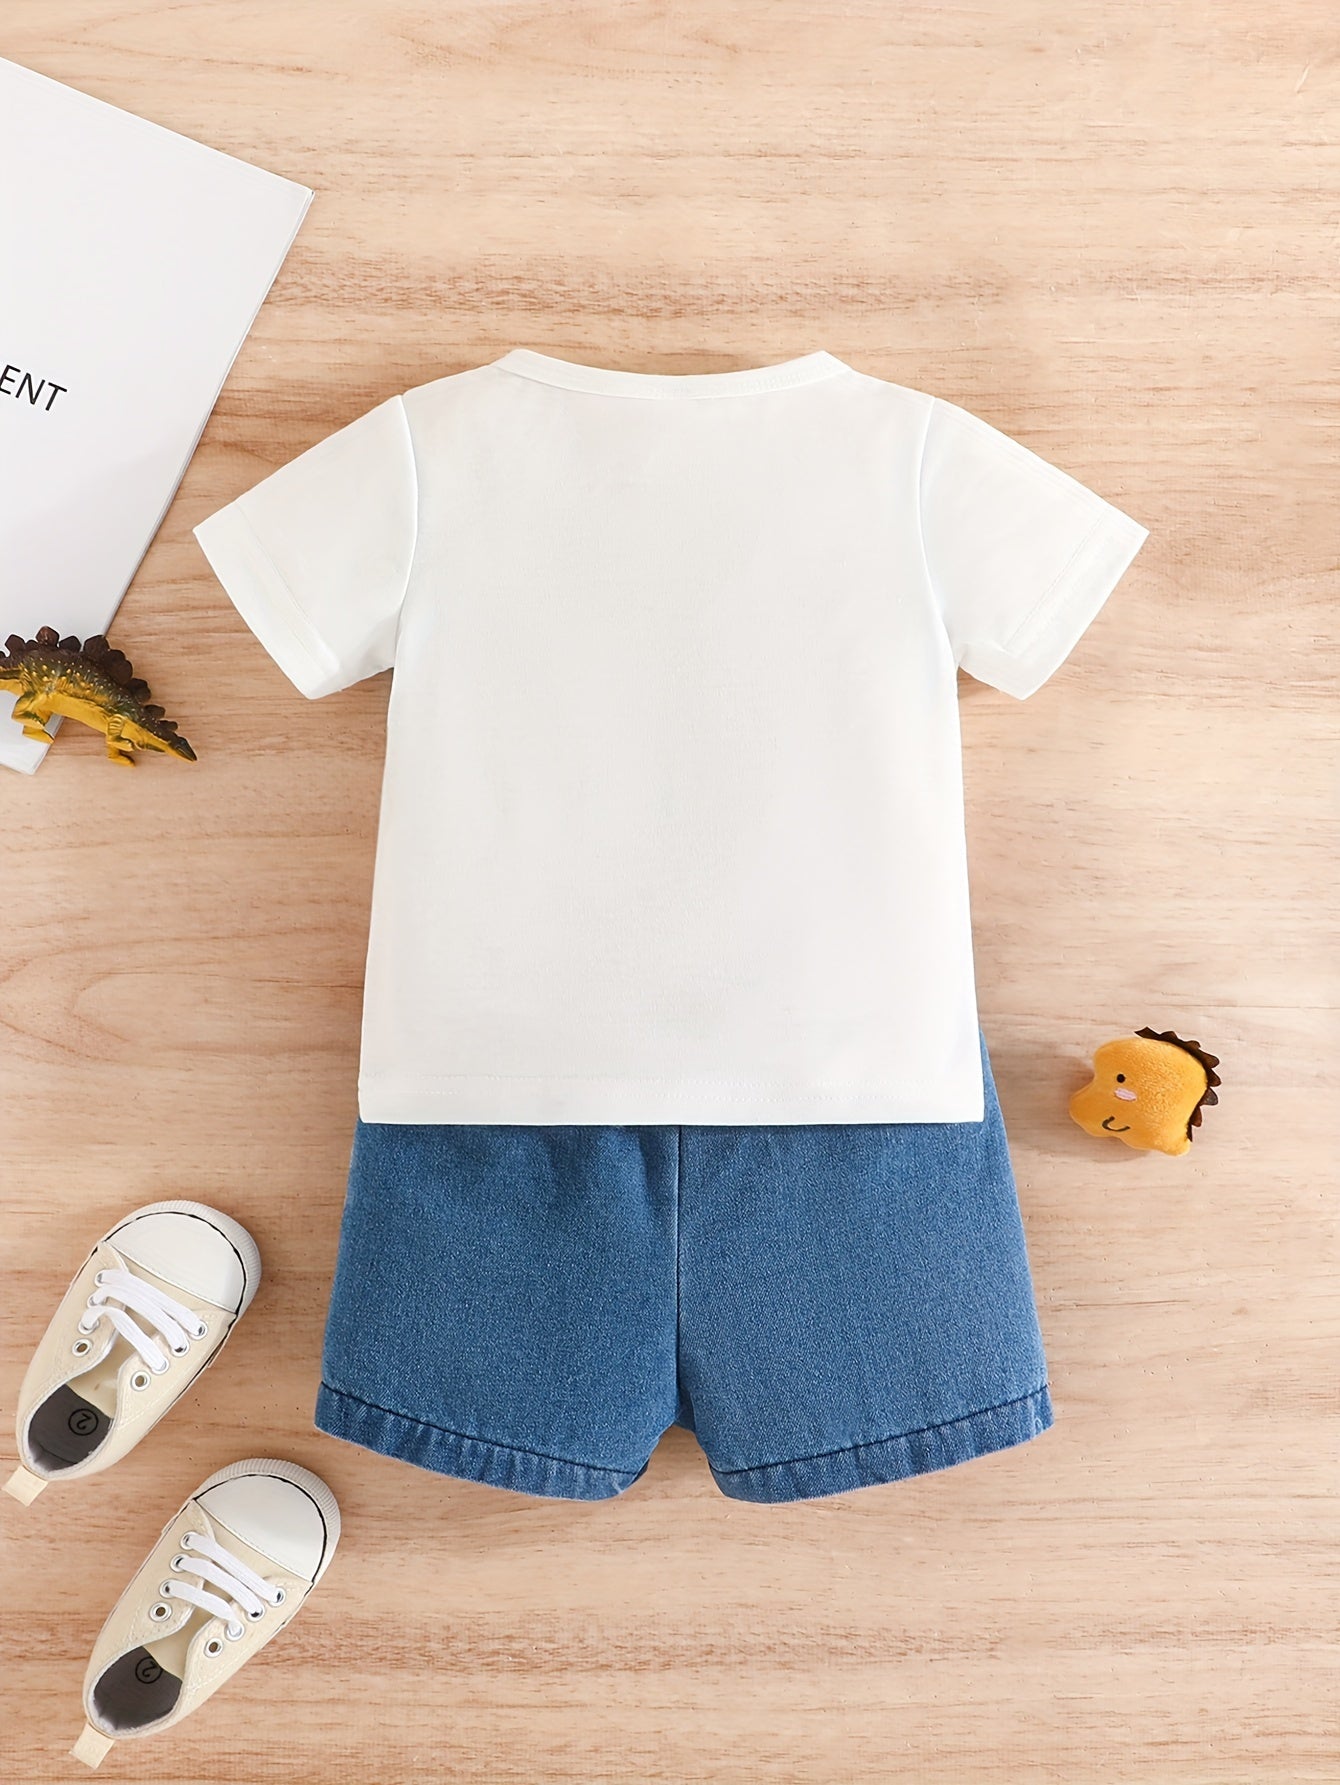 2 - Piece Dinosaur - Themed Boys' Outfit - Comfortable T - Shirt & Stylish Denim Shorts Set - Perfect for Playdates & Summer Fun, Infant Sizes Available - Ammpoure Wellbeing